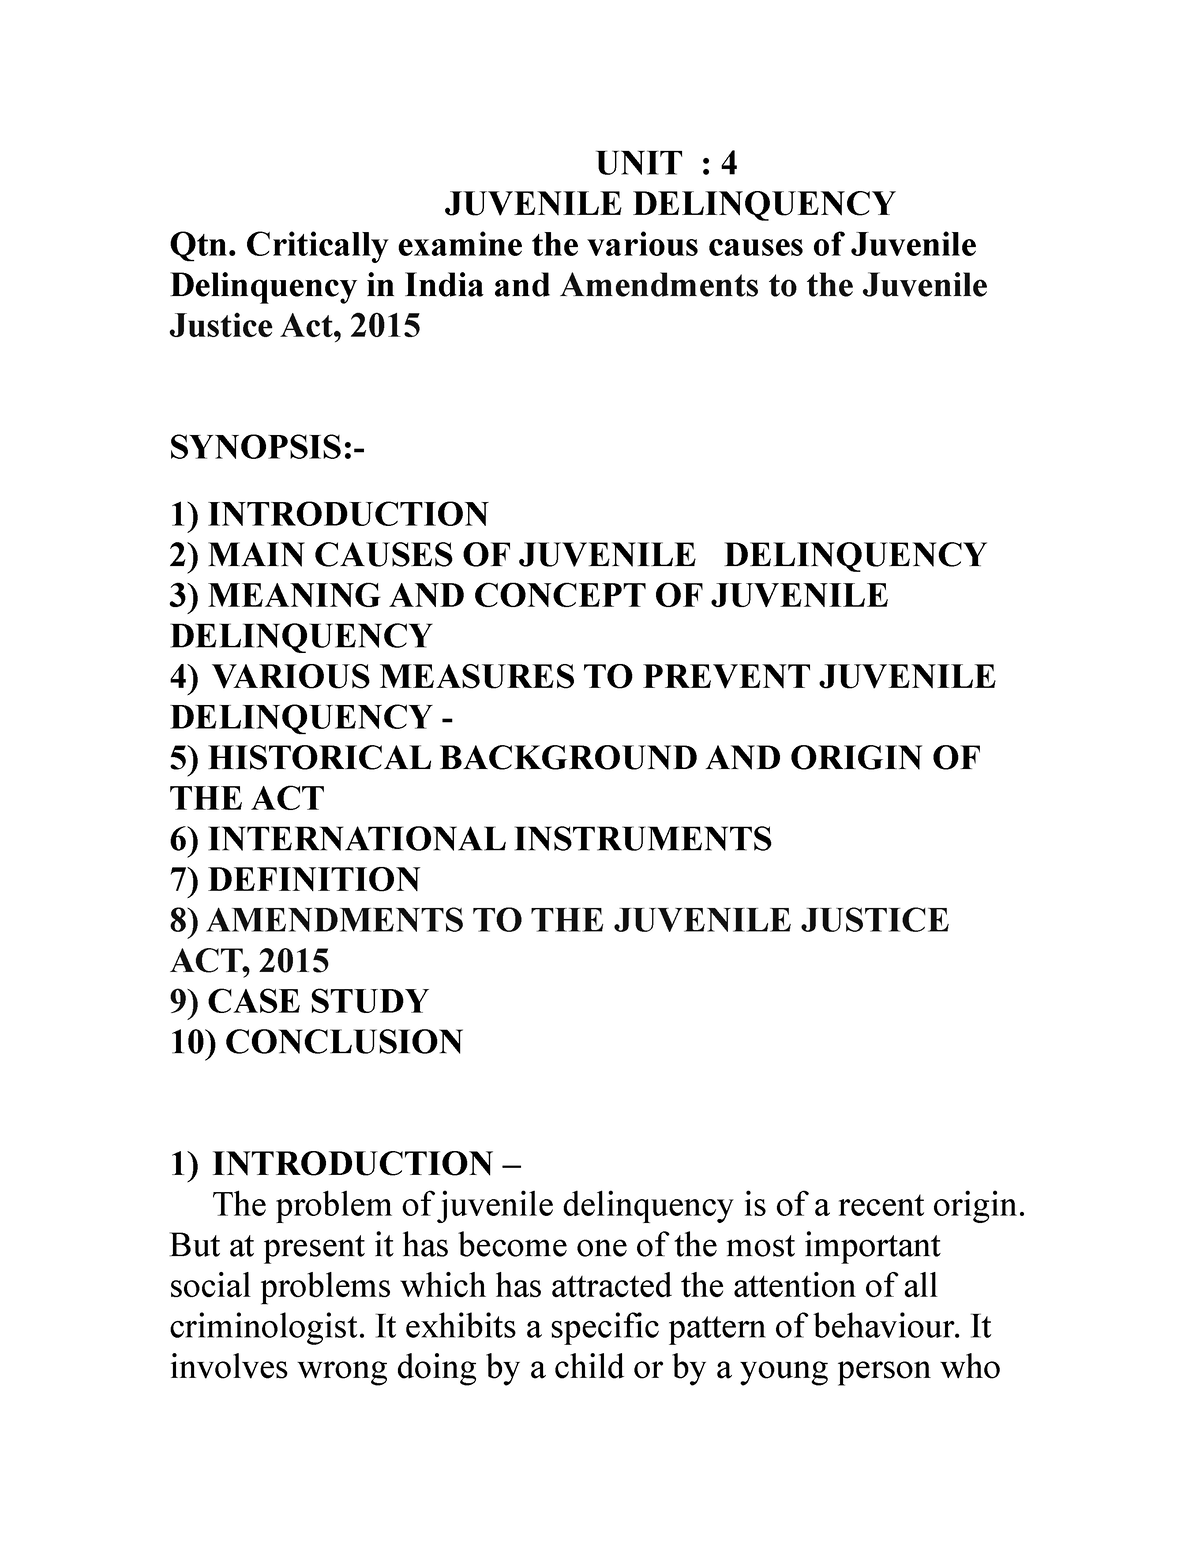 dissertations on juvenile delinquency